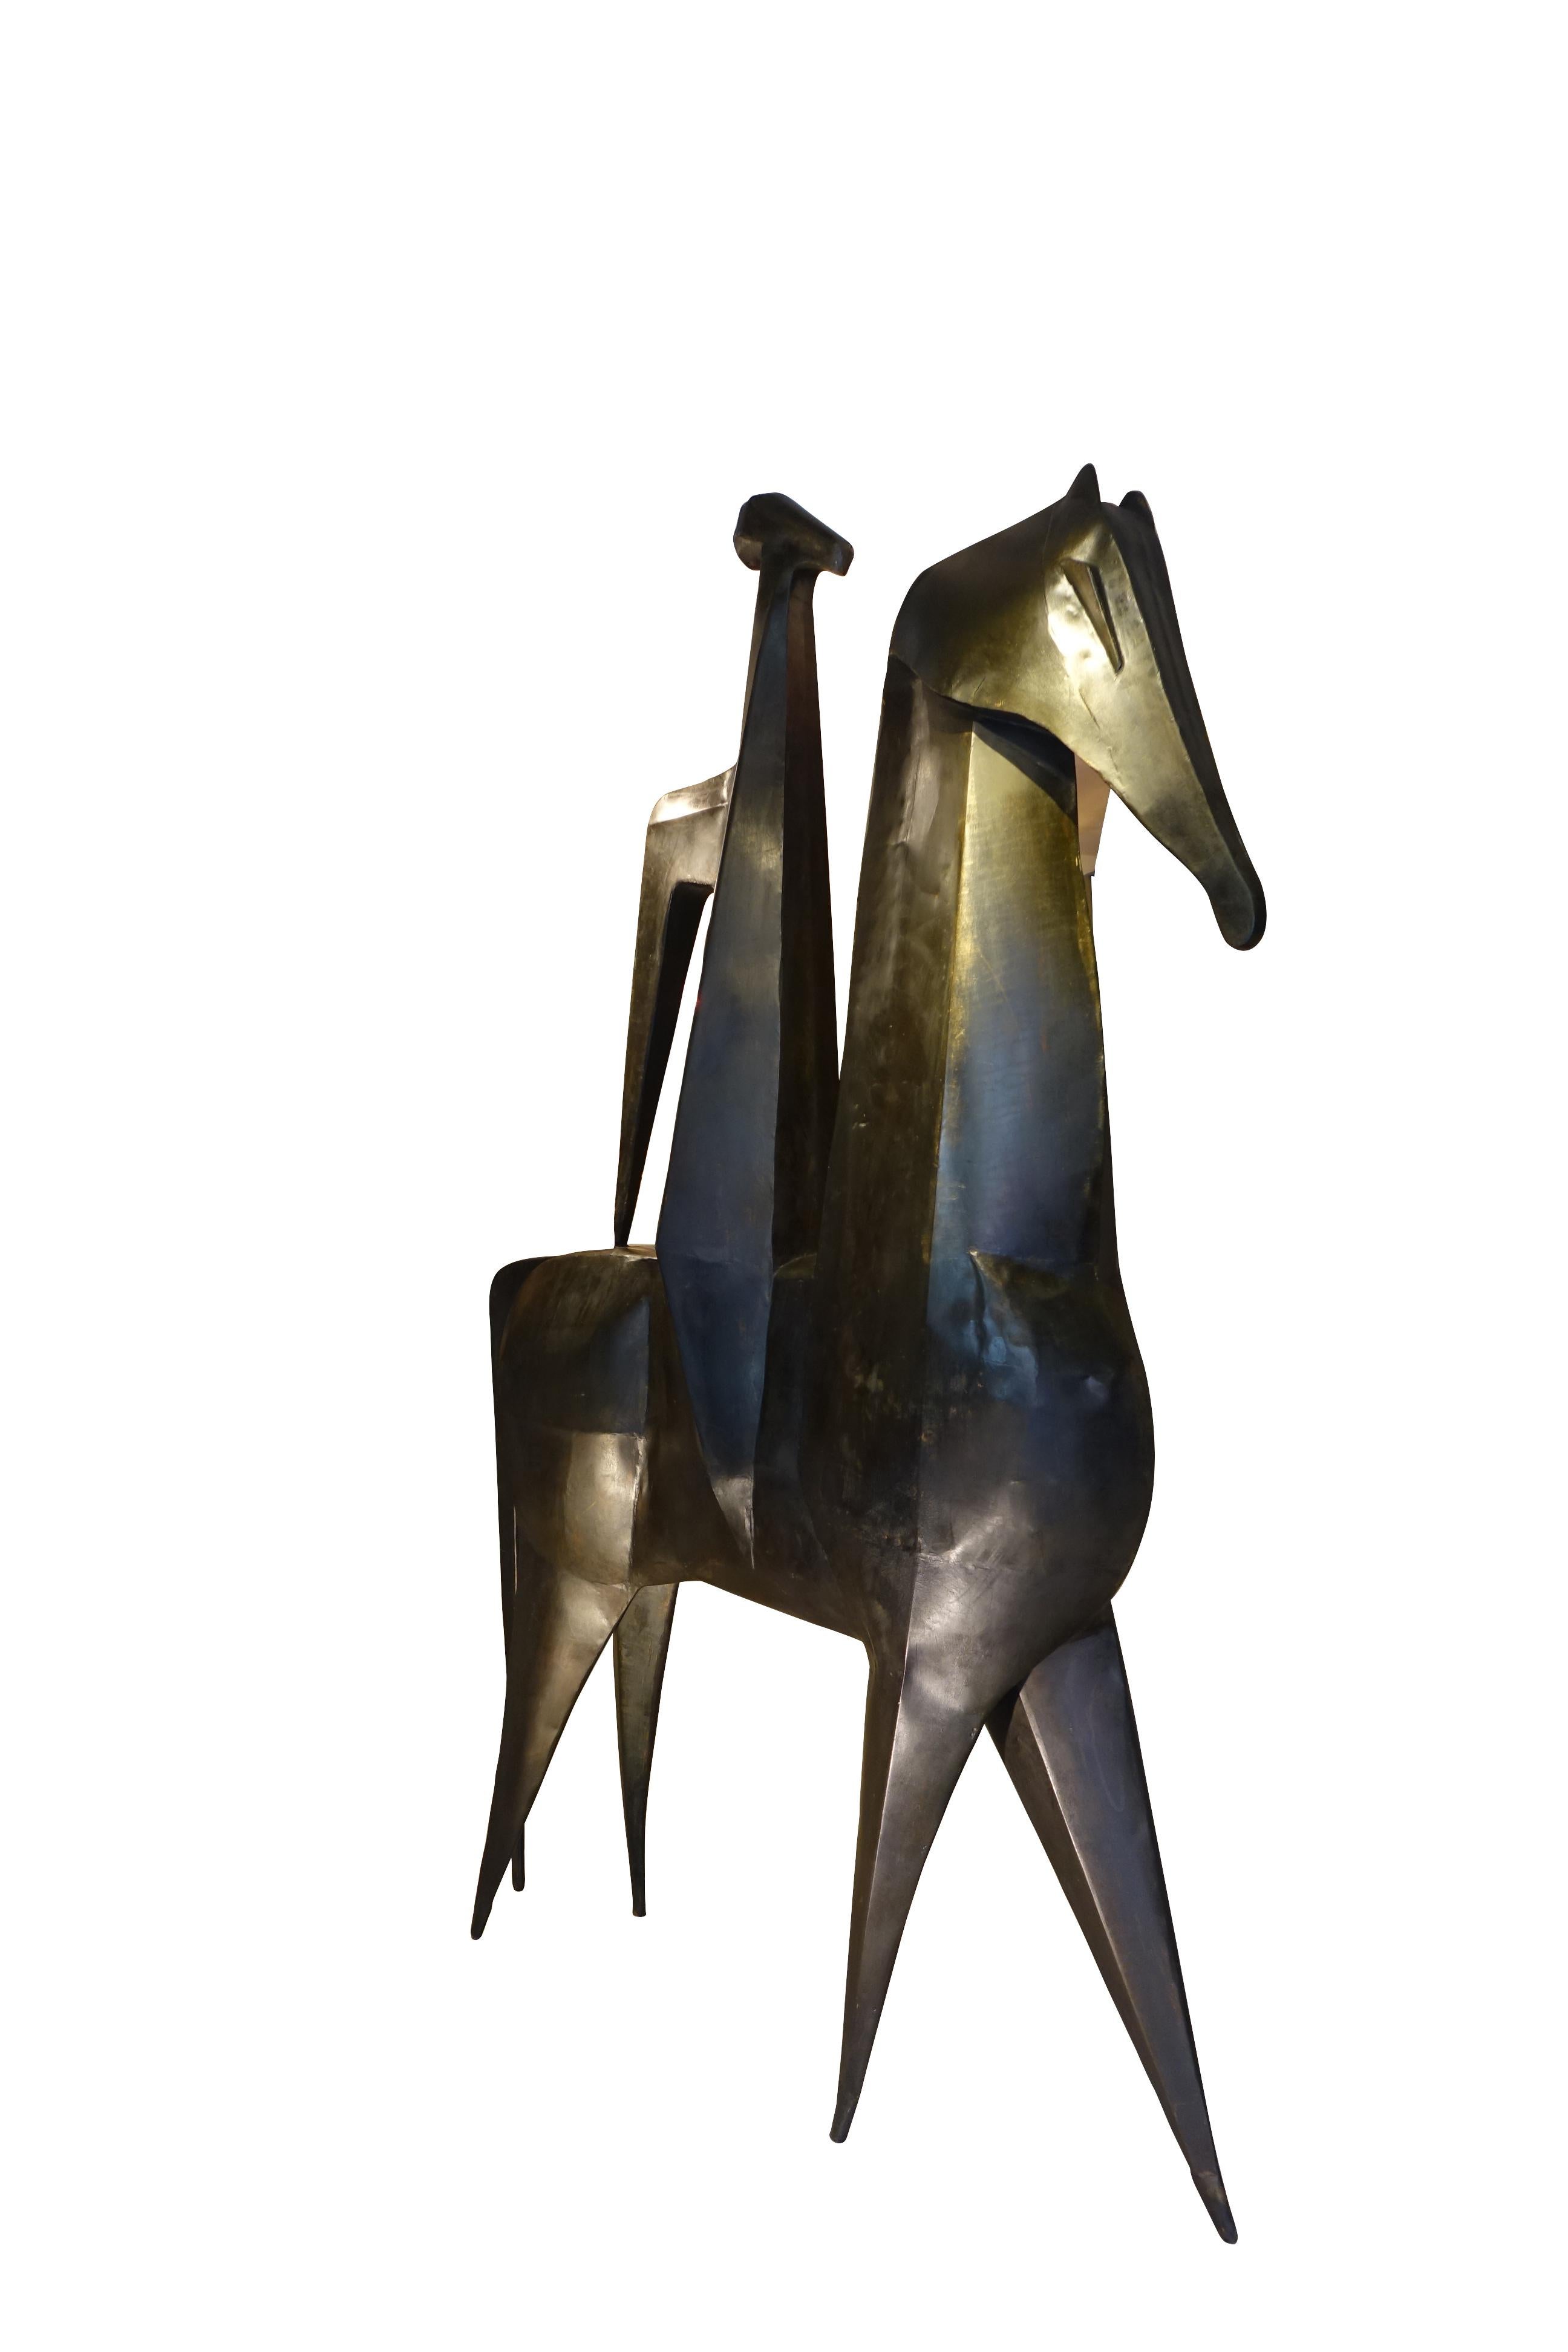 Mid-Century Modern Monumental Iron Sculpture, Rider on a Horse, Signed AMBROSIO, 1967 For Sale